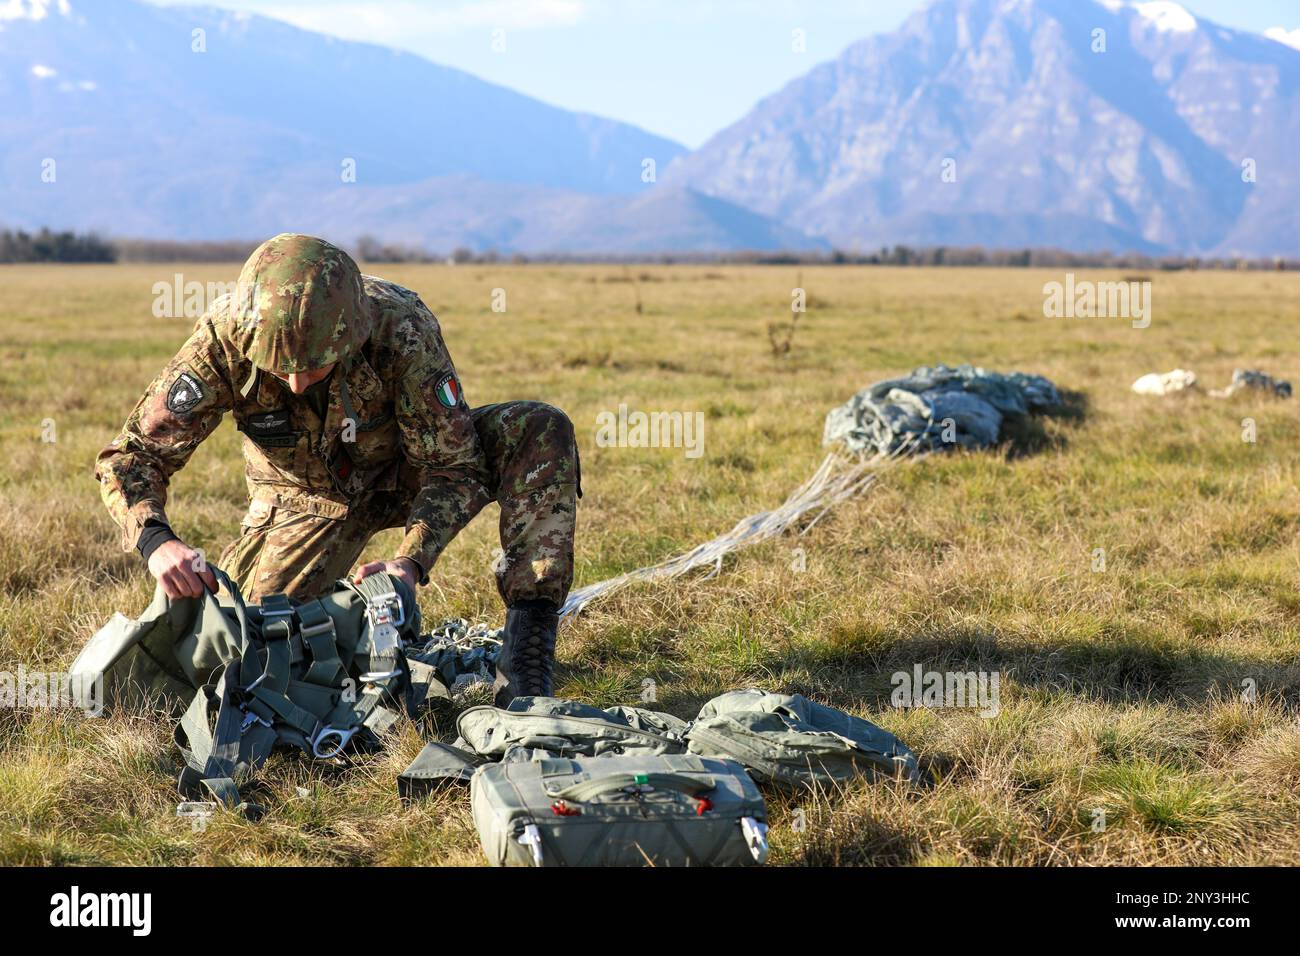 An Italian Army paratrooper with the Brigata Paracadutisti 'Folgore' repacks his chute after landing near Aviano, Italy on Jan. 26, 2023. The 173rd Airborne Brigade is the U.S. Army's Contingency Response Force in Europe, providing rapid forces to the United States European, Africa and Central Commands areas of responsibilities. Forward-based in Italy and Germany, the Brigade routinely trains alongside NATO allies and partners to build interoperability and strengthen the Alliance. Stock Photo